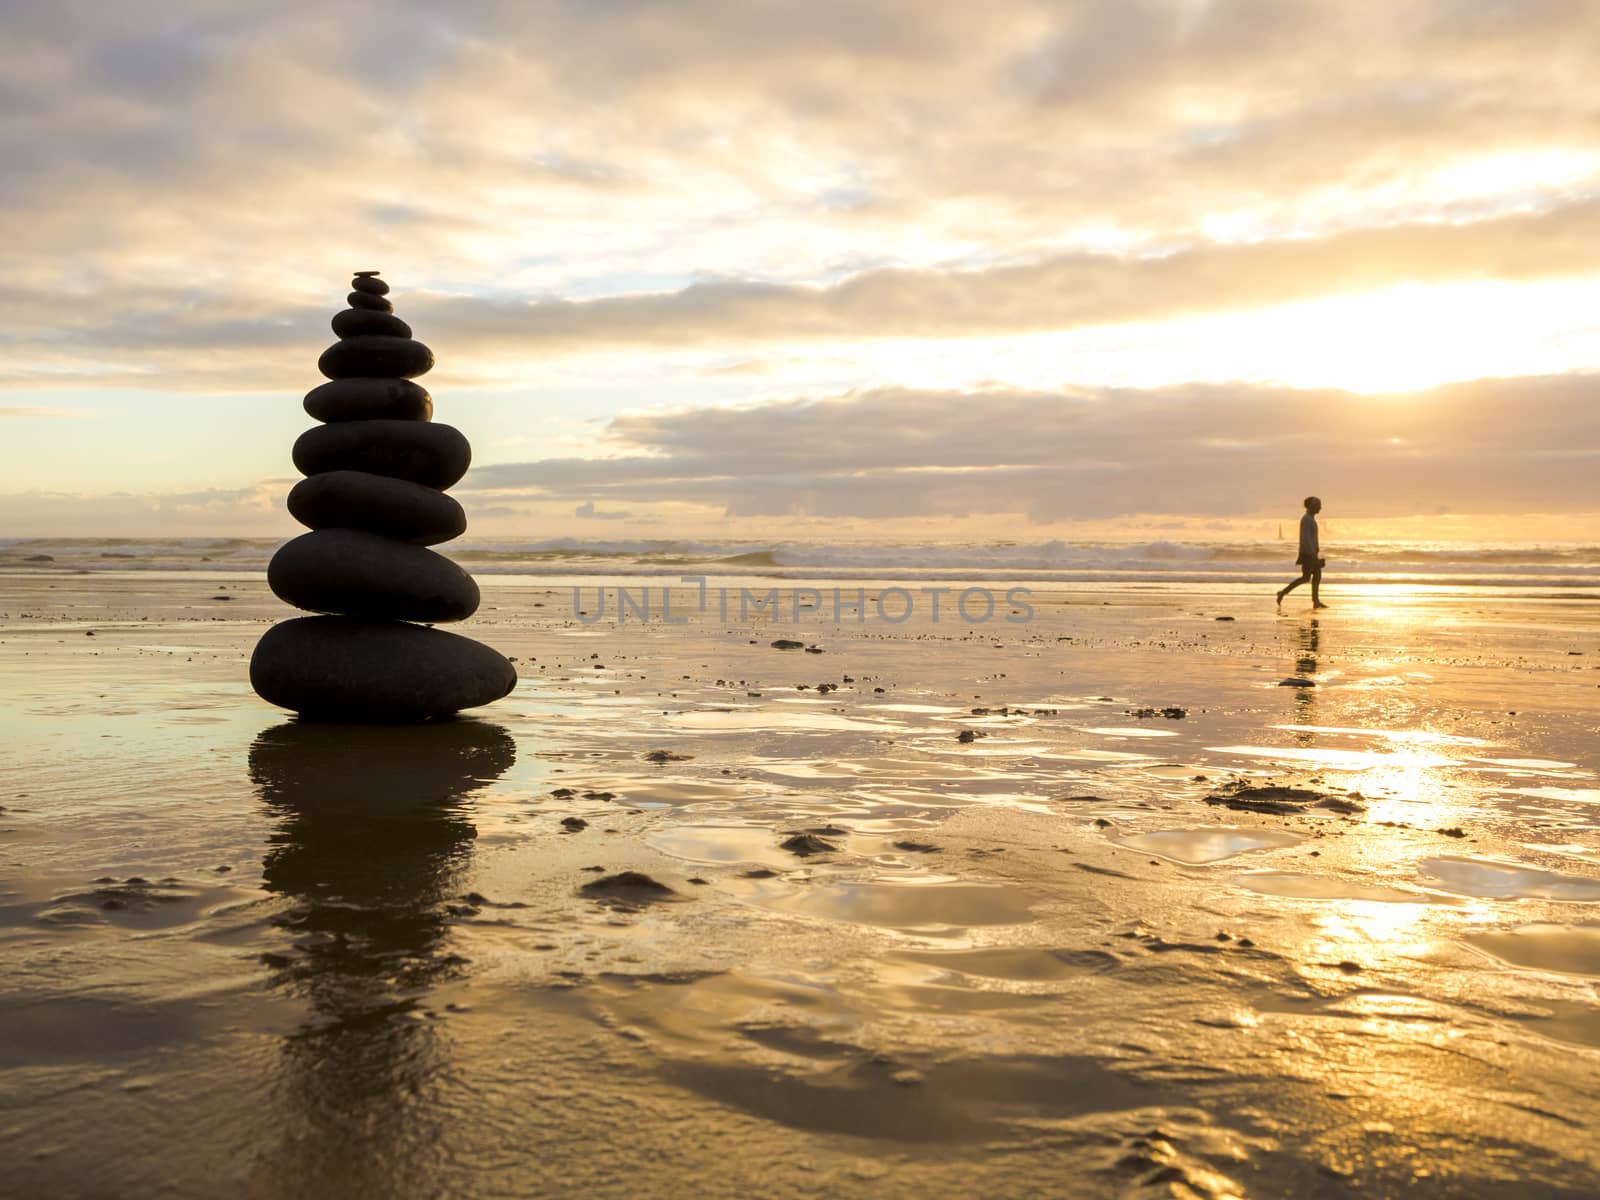 Sea stones stacked by Iko